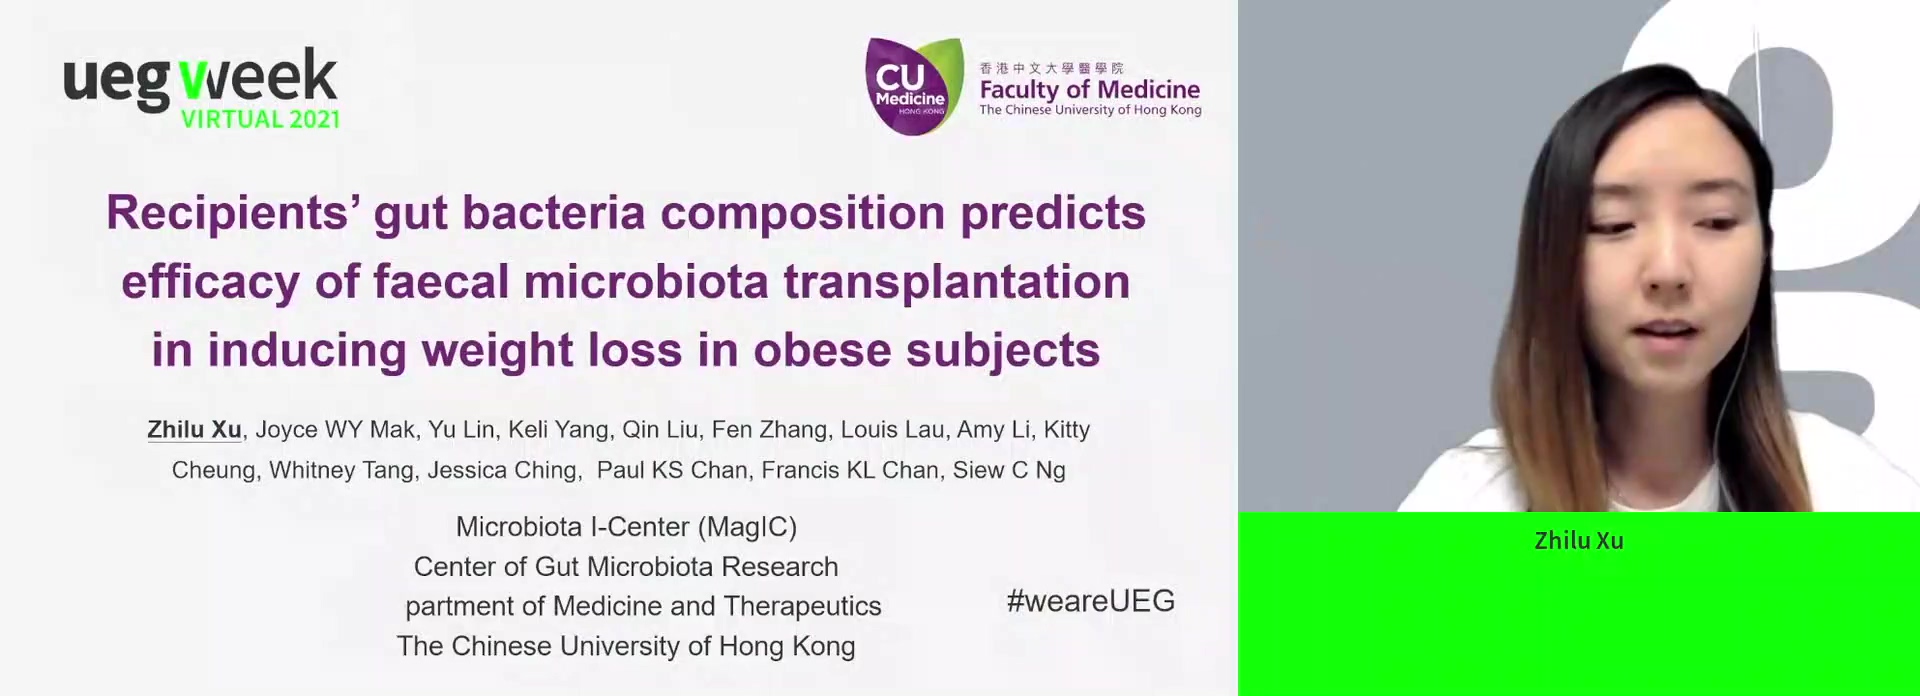 RECIPIENT’S GUT BACTERIA COMPOSITION PREDICTS EFFICACY OF FECAL MICROBIOTA TRANSPLANTATION IN INDUCING WEIGHT LOSS IN OBESE SUBJECTS